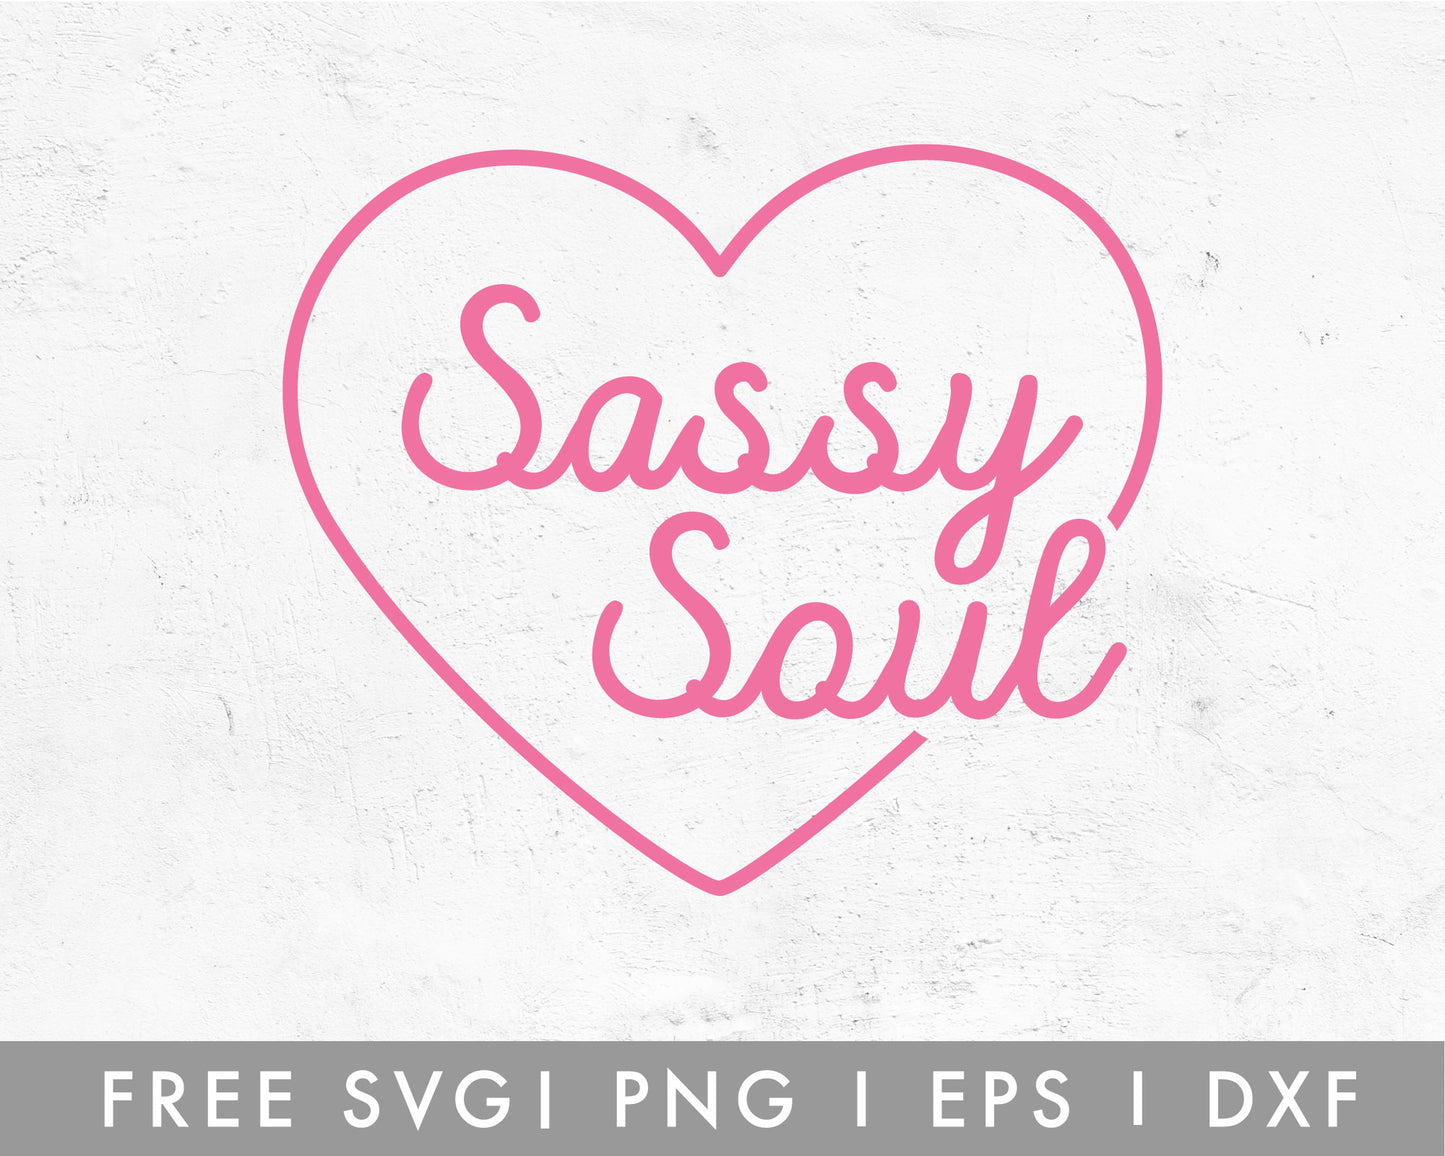 FREE Girl Power SVG | Sassy Soul SVG Cut File for Cricut, Cameo Silhouette | Free SVG Cut File